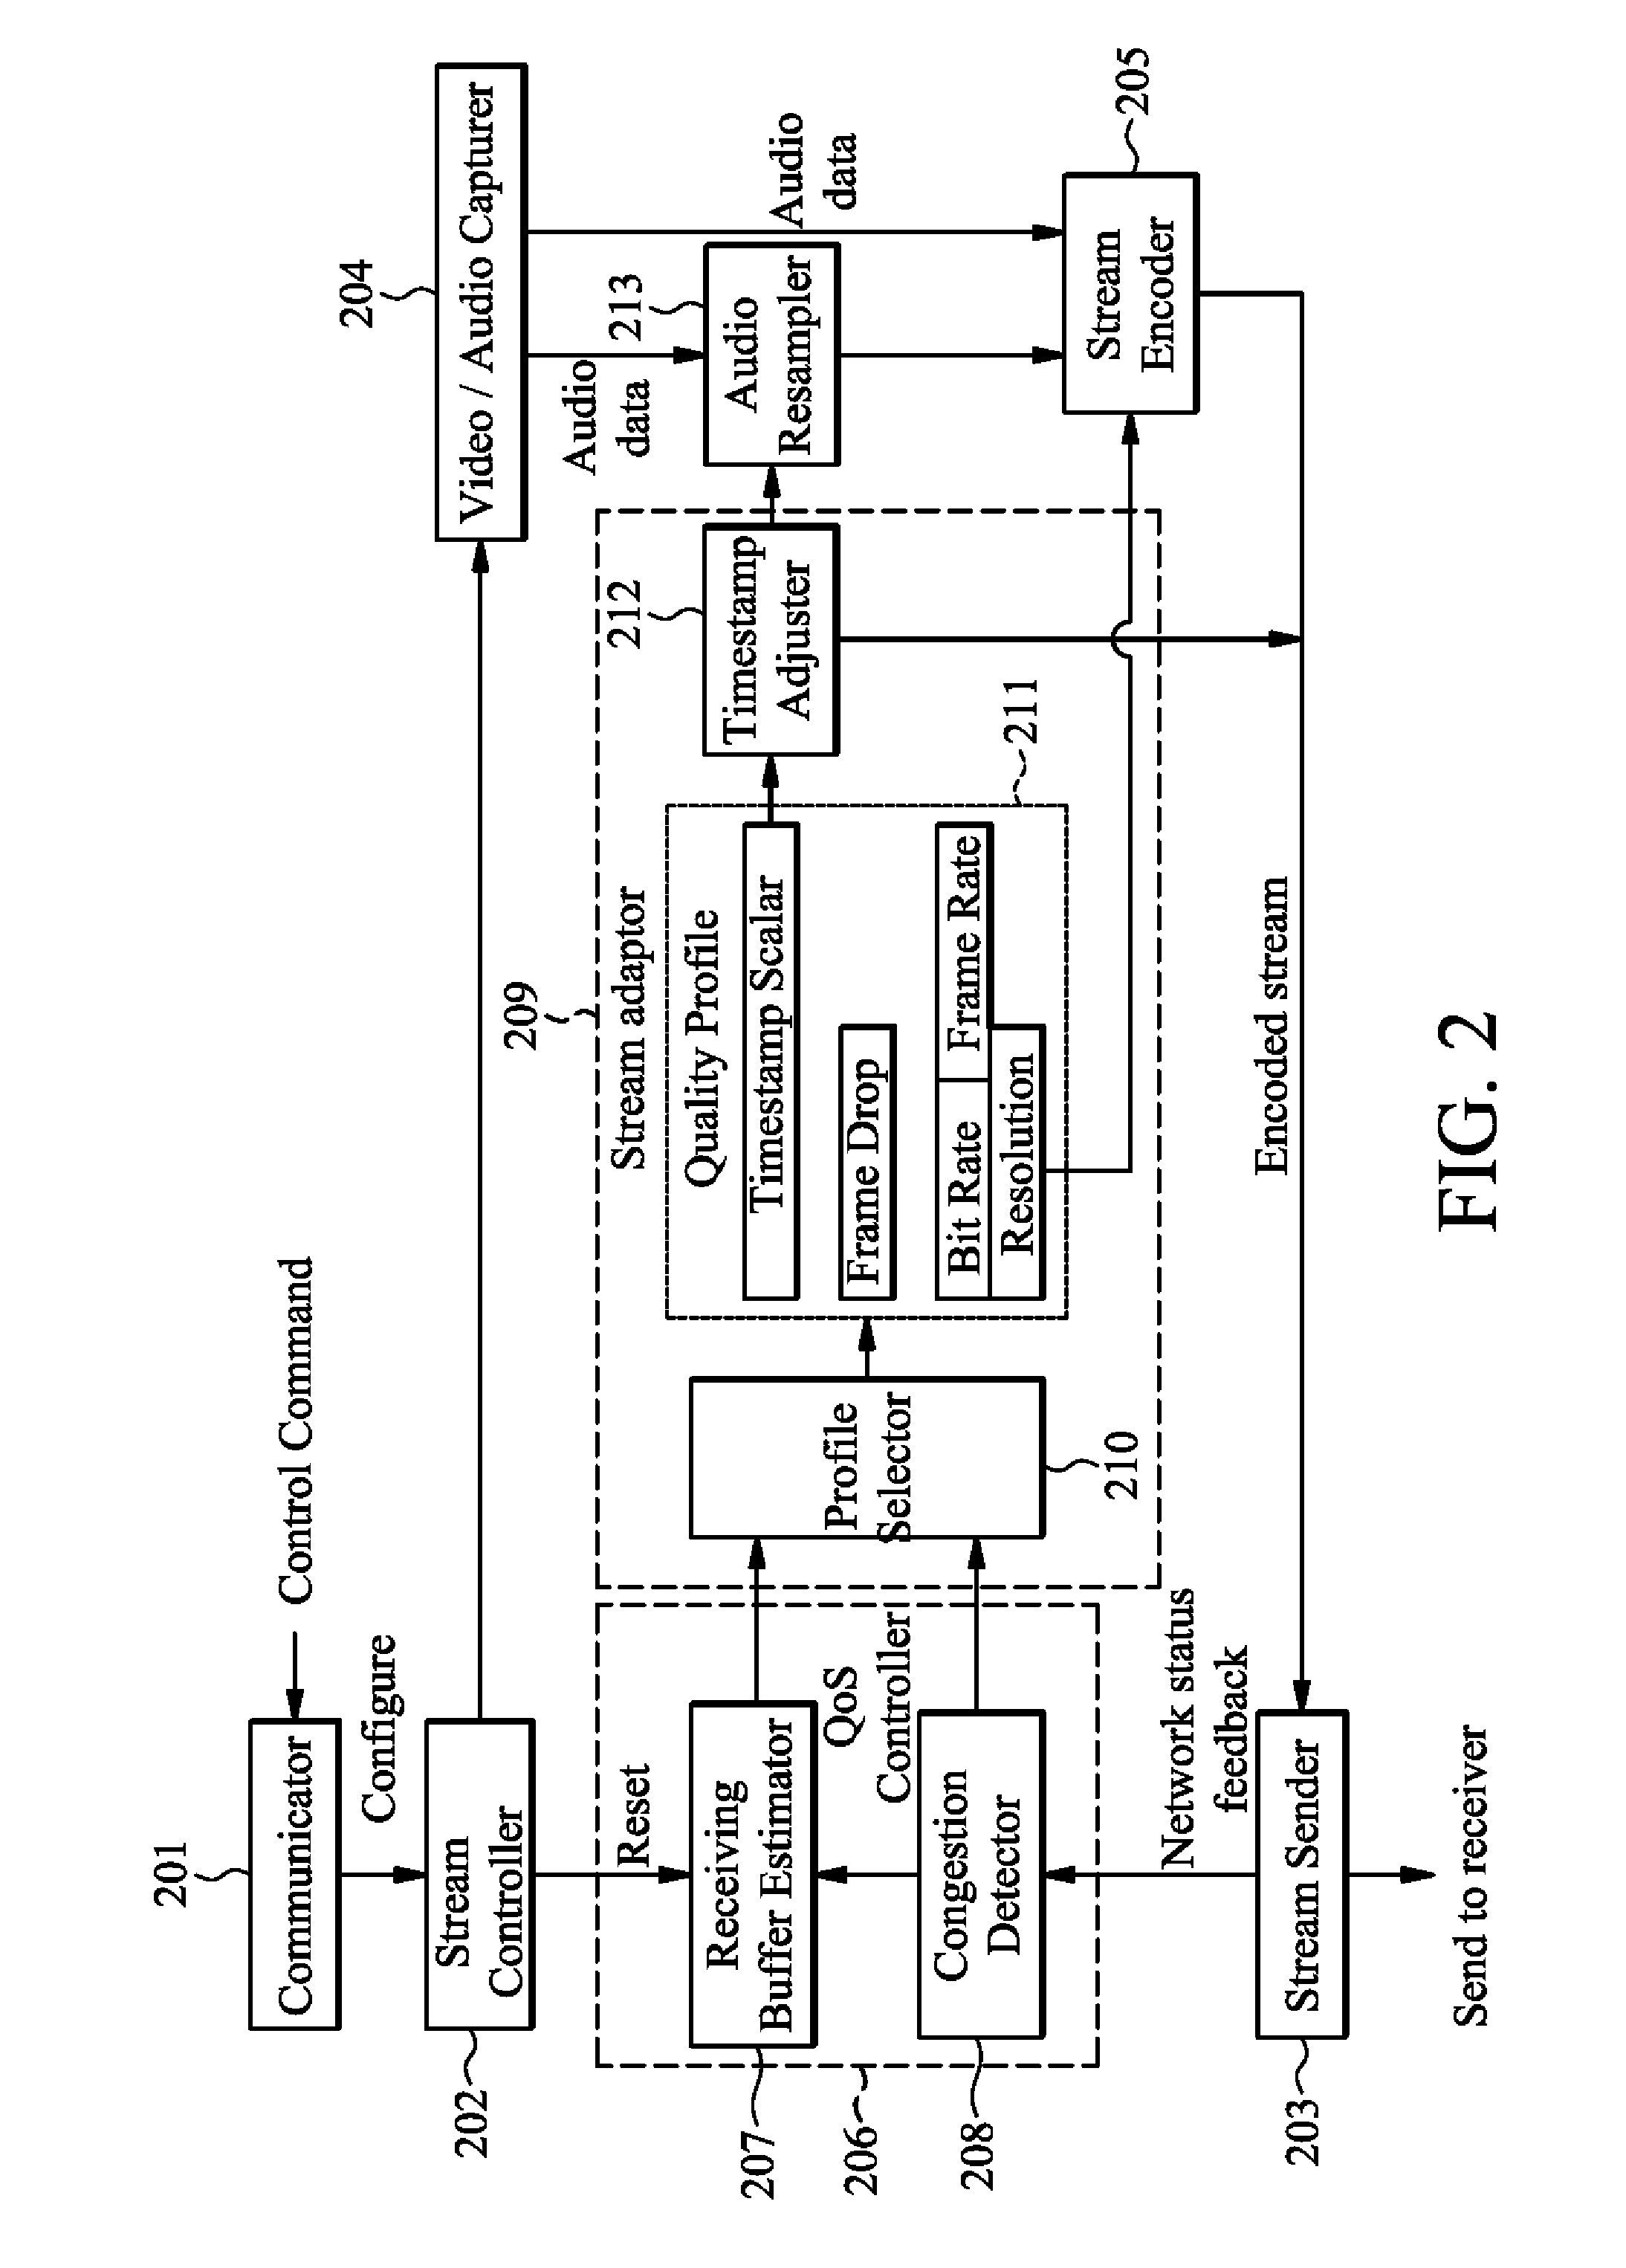 Method for audio and video control response and bandwidth adaptation based on network streaming applications and server using the same